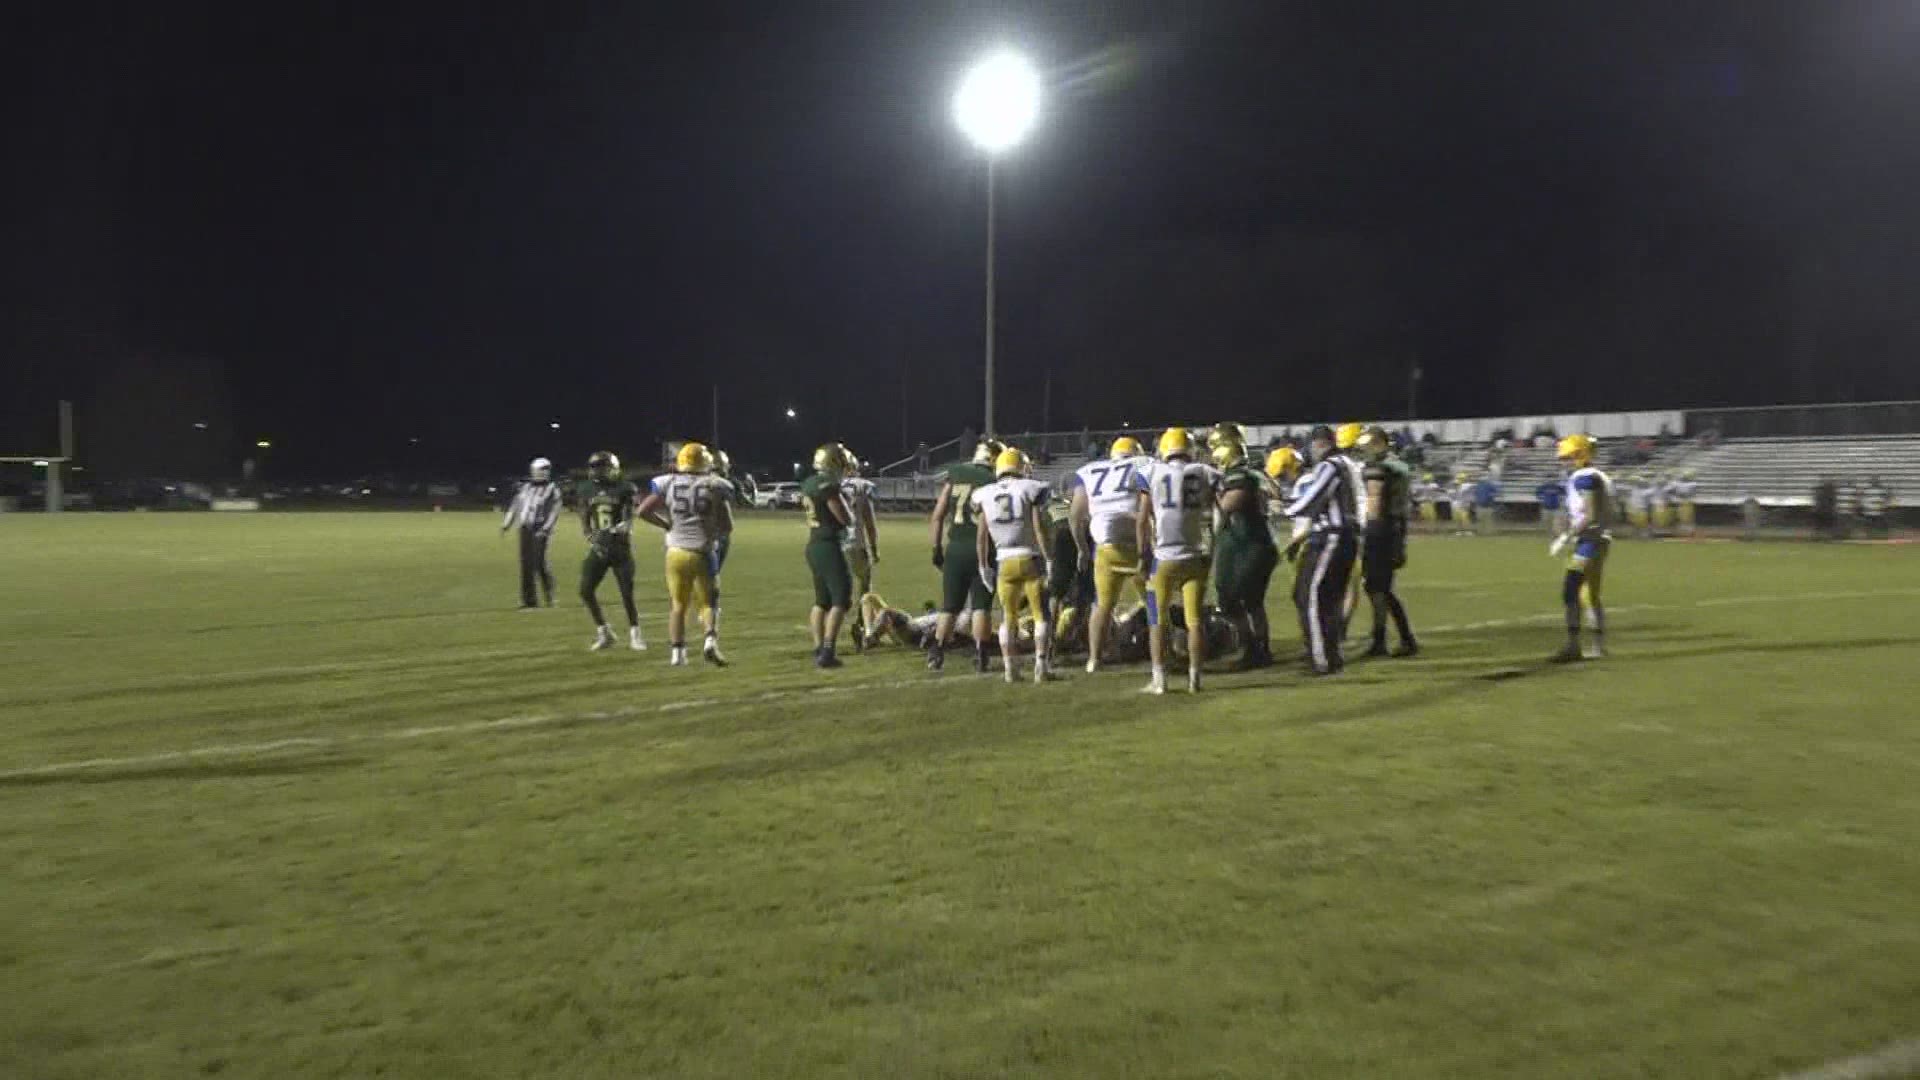 Highlights from the match-up between Harrison and Muskegon Catholic Central.